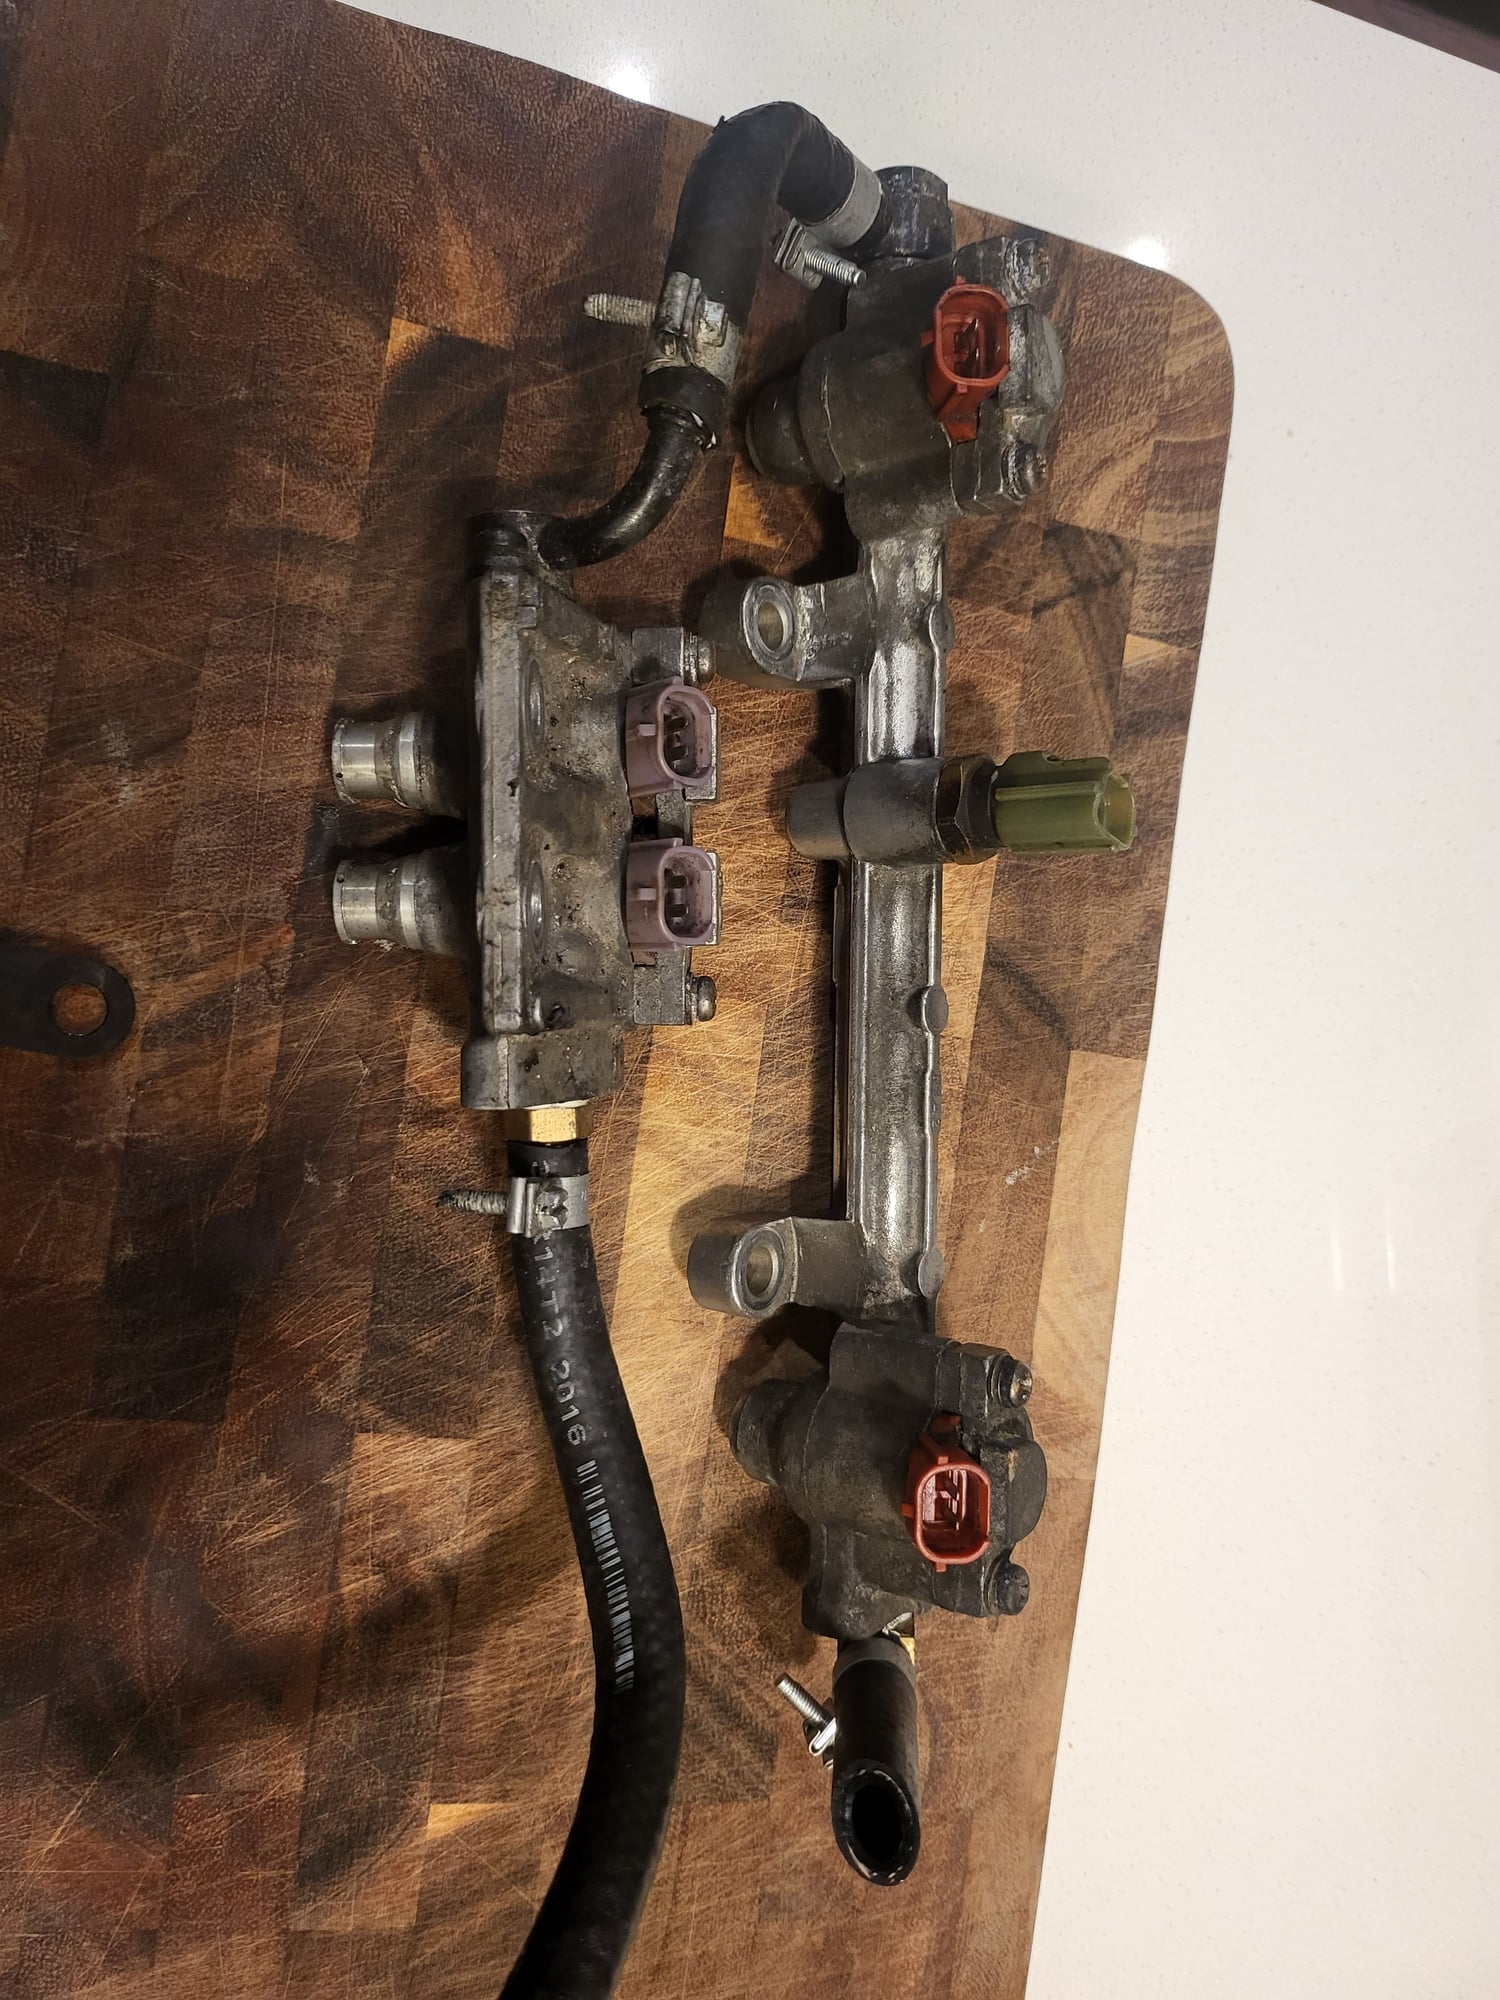 Engine - Intake/Fuel - FD RX7 - Stock Fuel Rails and Injectors - Complete - Used - 1992 to 1995 Mazda RX-7 - Coquitlam, BC V3E0K6, Canada